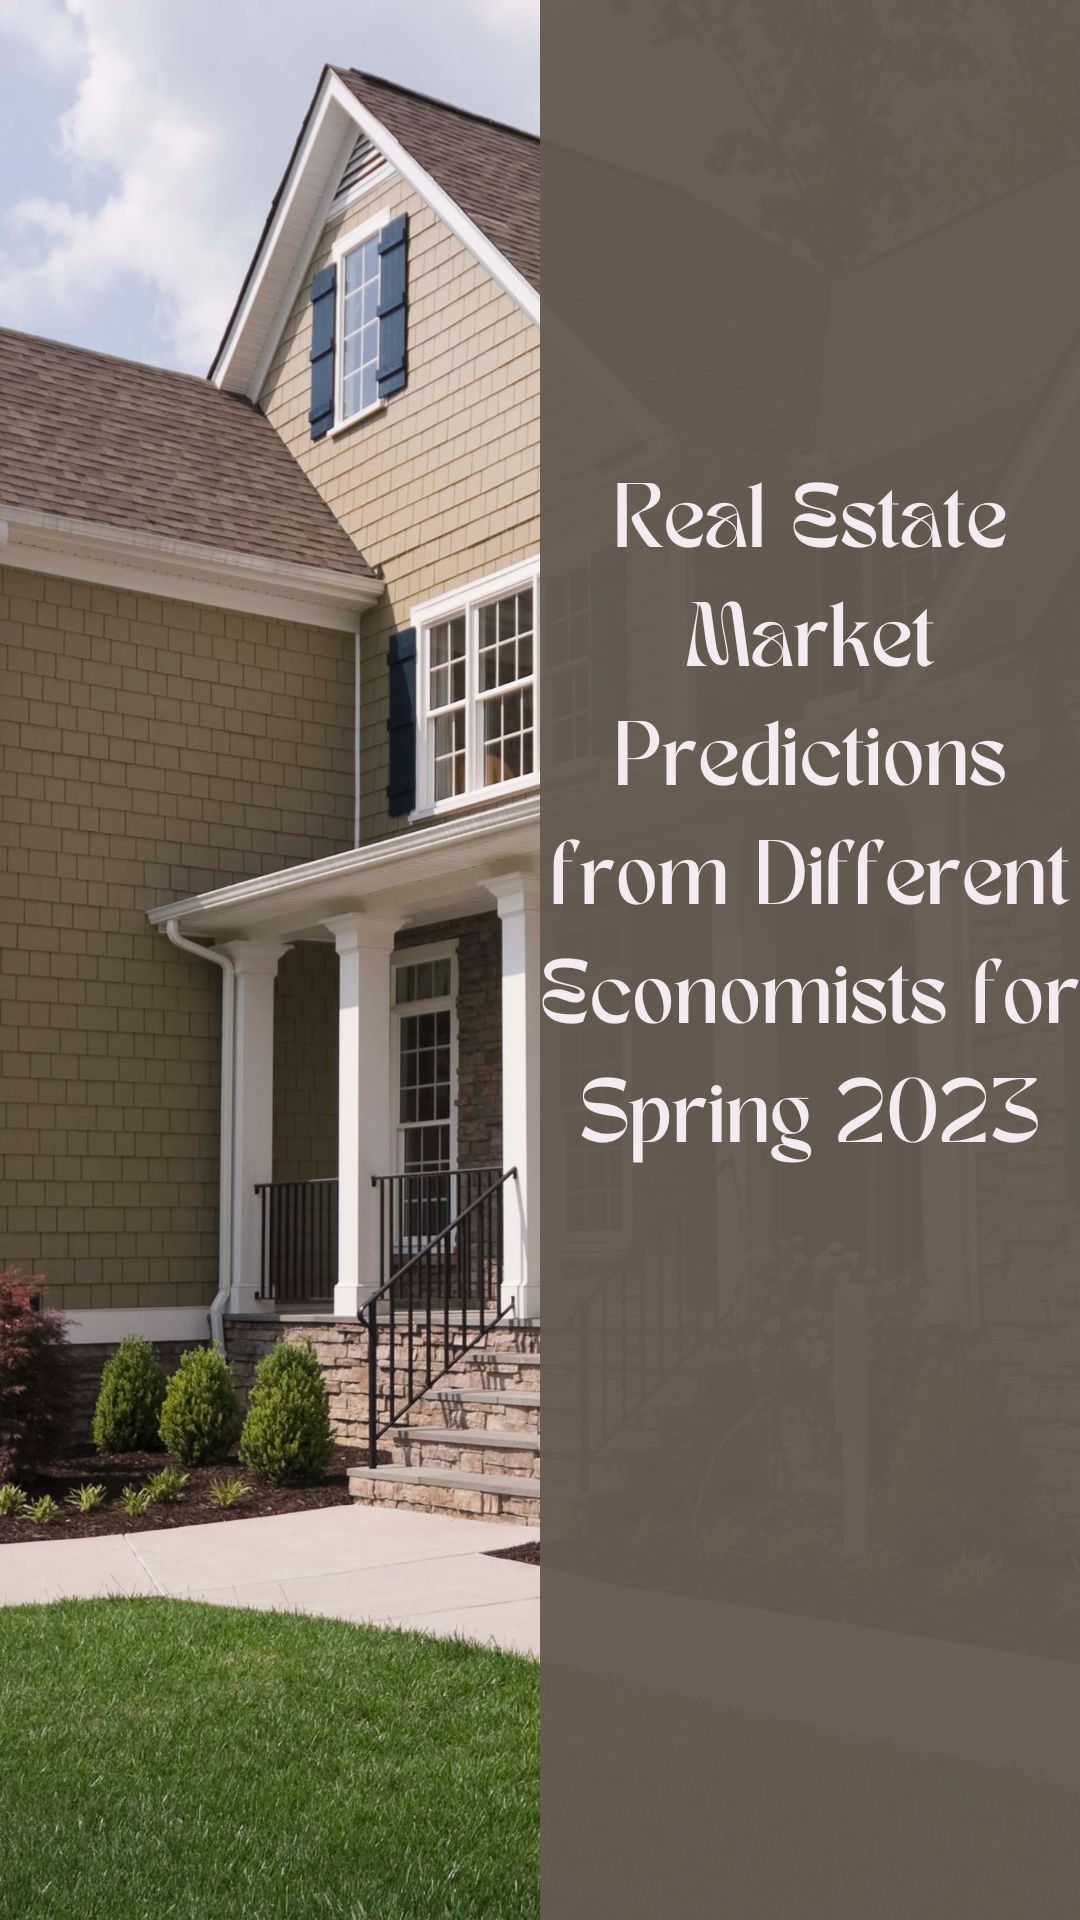 Real Estate Market Predictions from Different Economists for Spring 2023